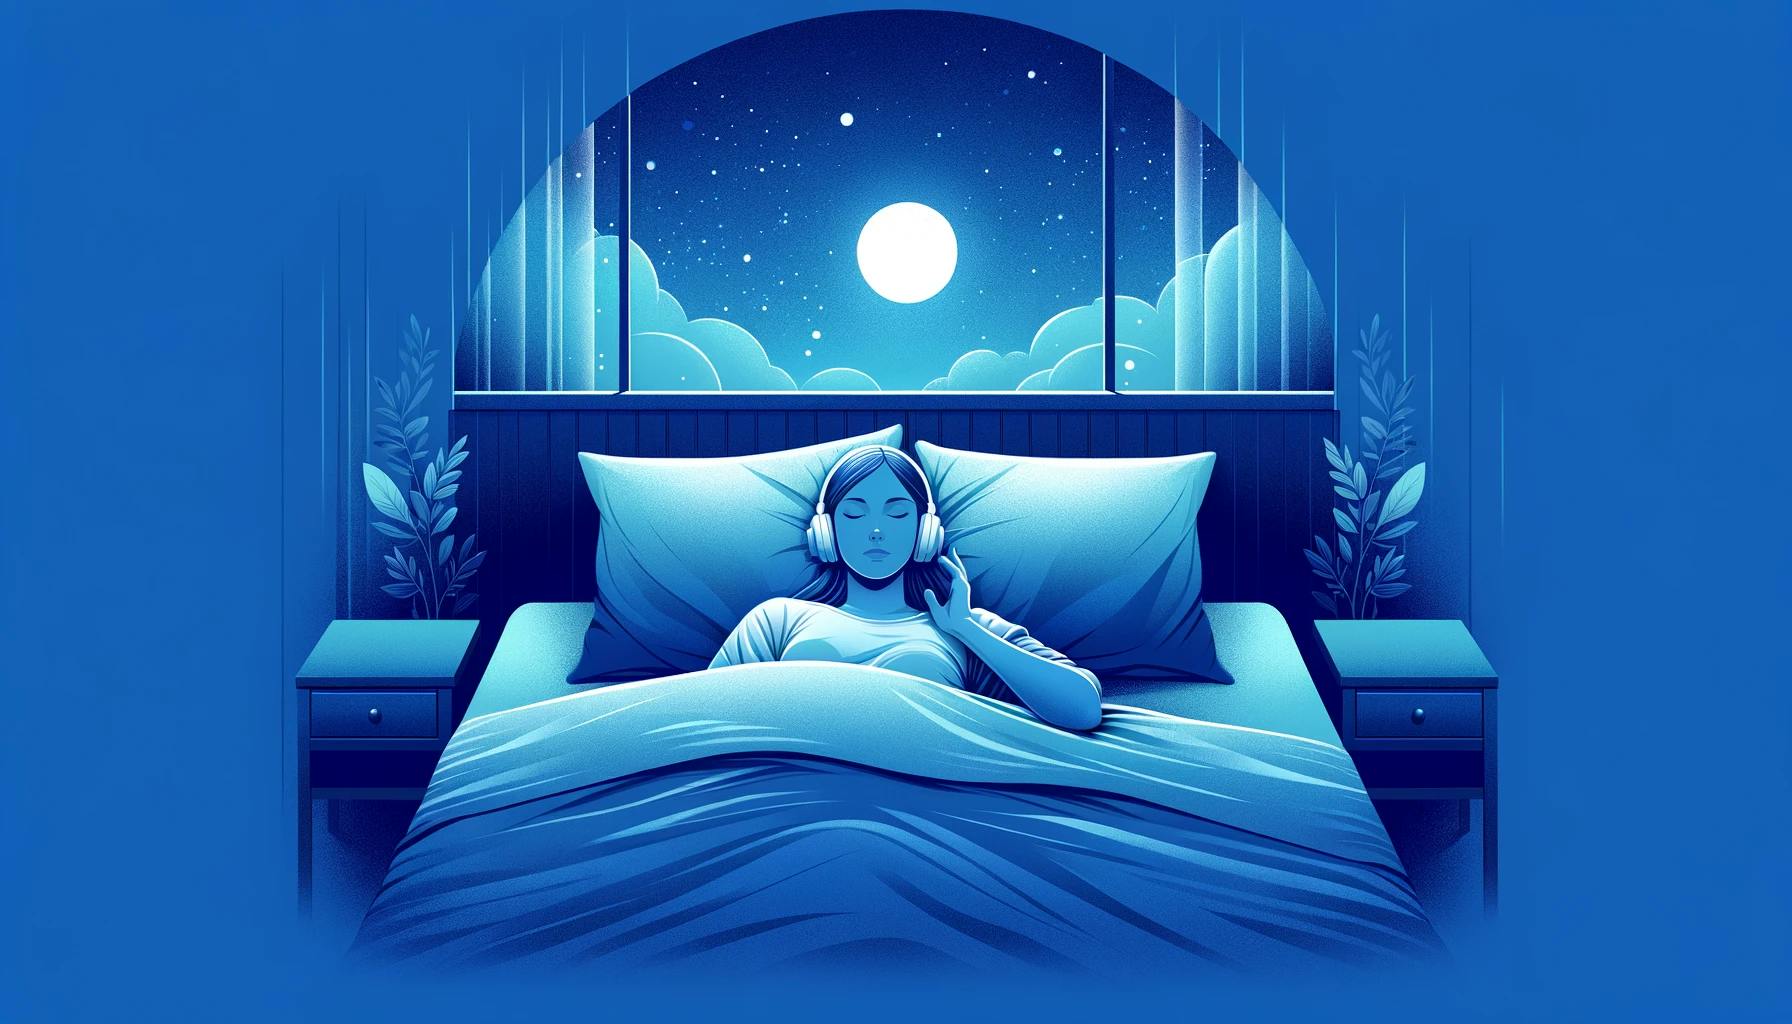 Sleeping: Drift into a peaceful sleep with videos featuring soothing sounds, sleep meditations, and gentle visuals, designed to help you relax and find restful sleep.